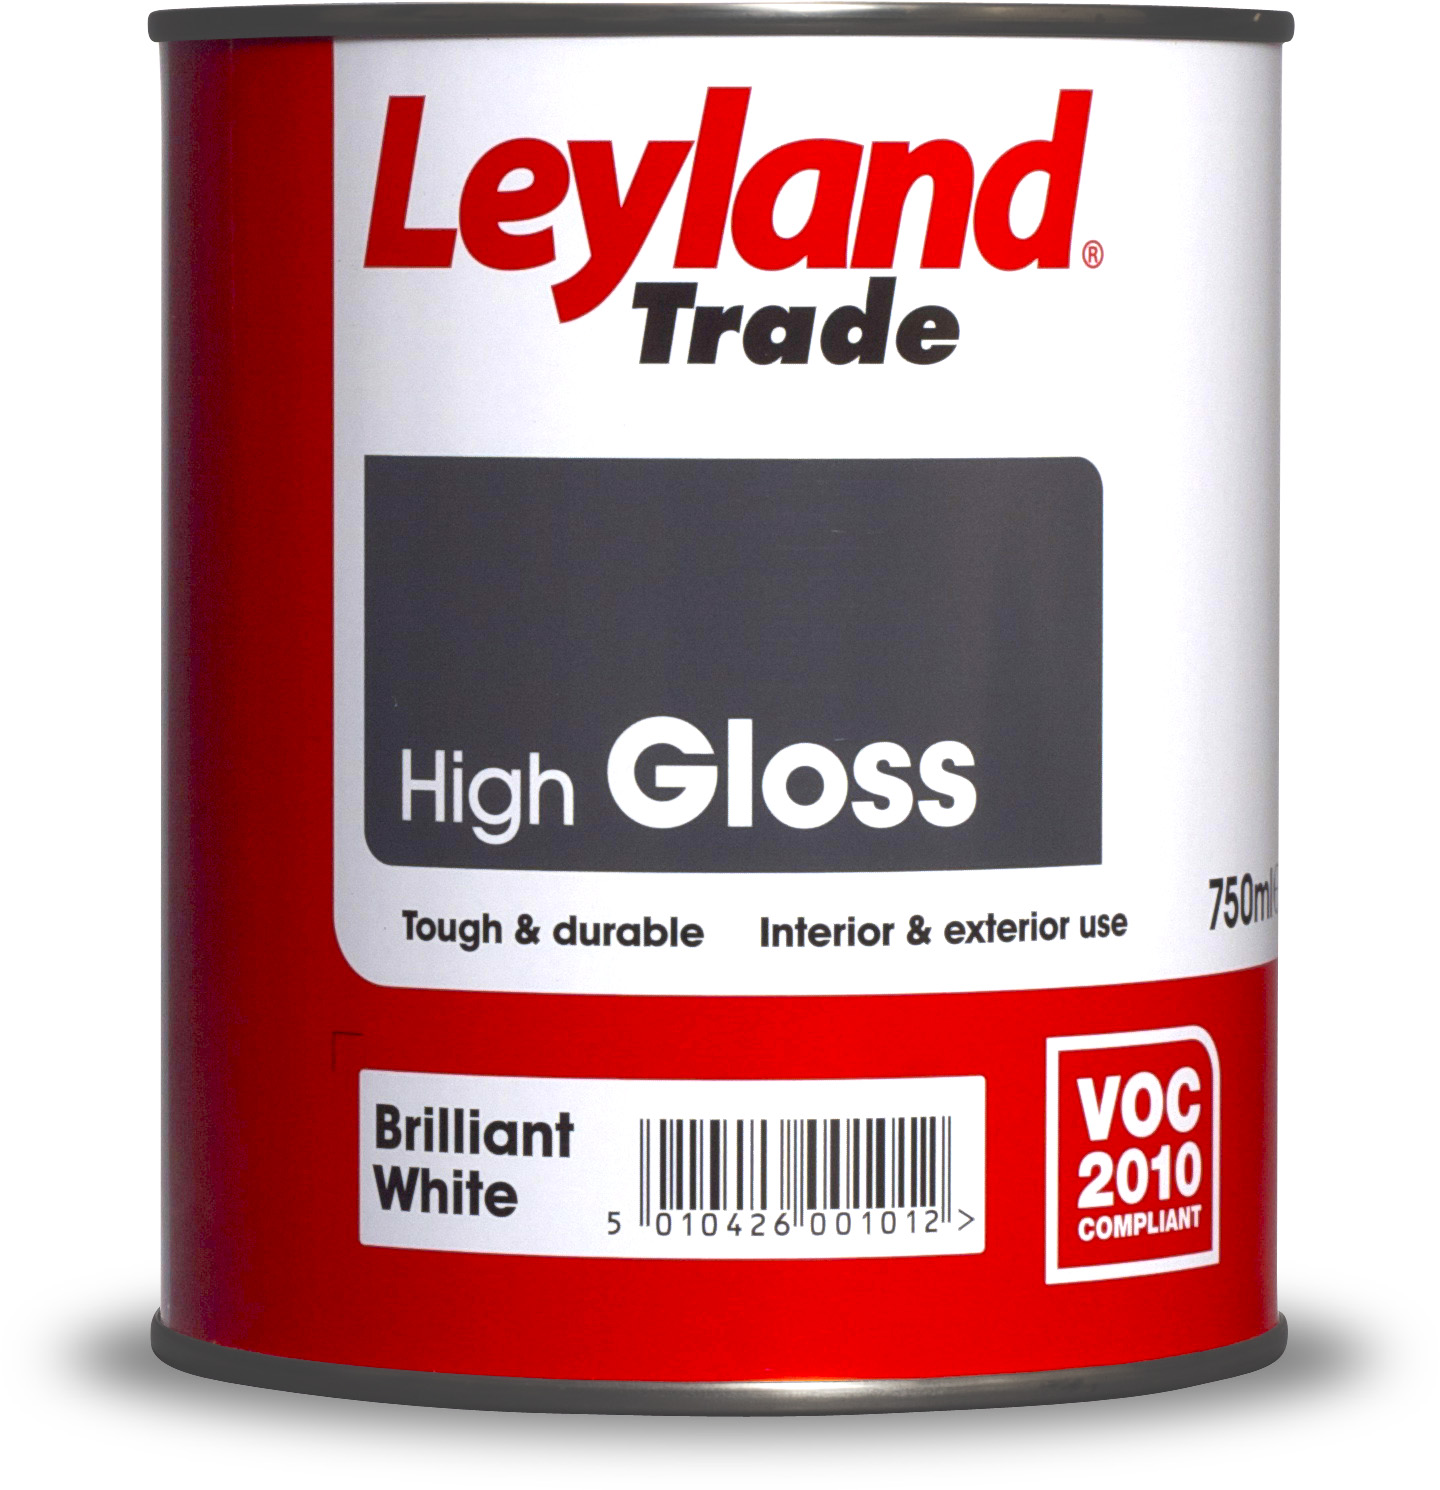 LEYLAND TRADE OIL BASED HIGH GLOSS PAINT